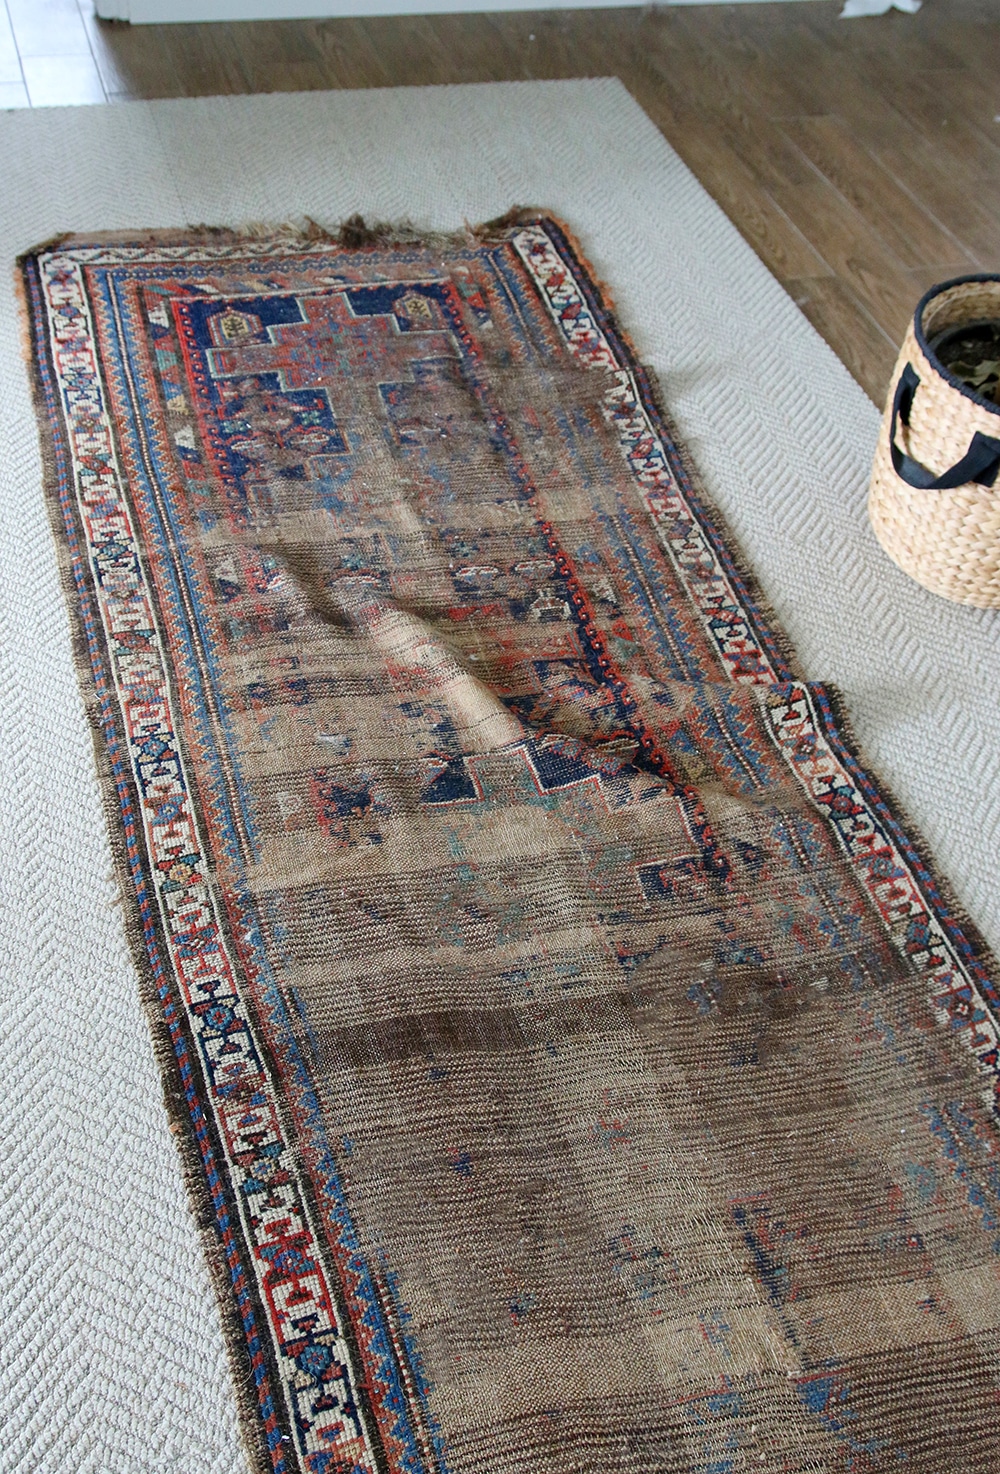 5 Tips For Keeping Area Rugs Exactly, Keep Rug From Sliding On Carpet